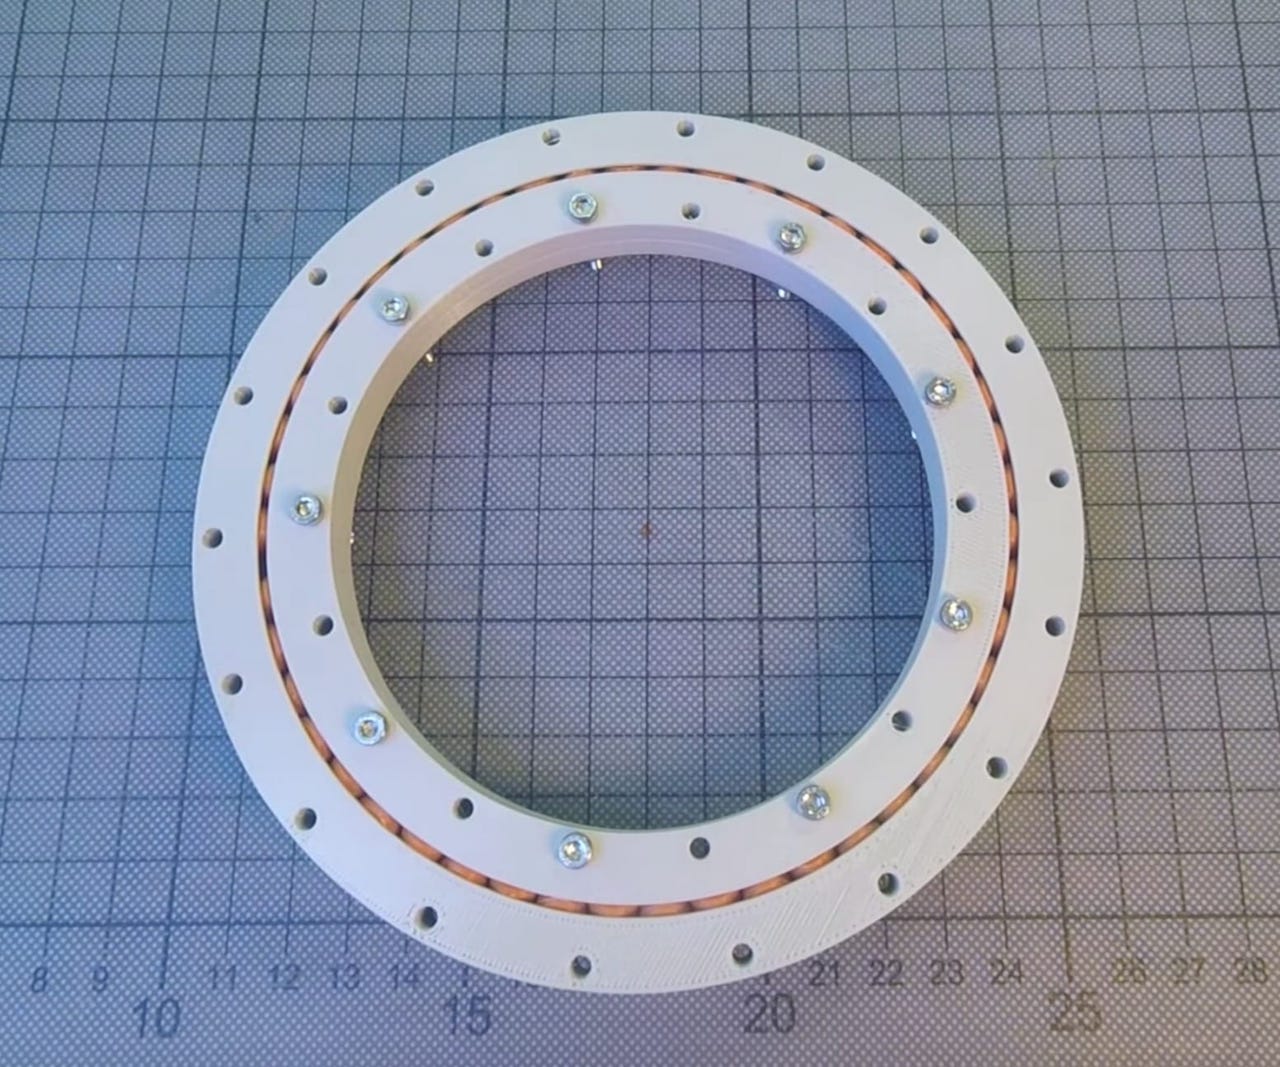  The completed 3D printed slew bearing system 